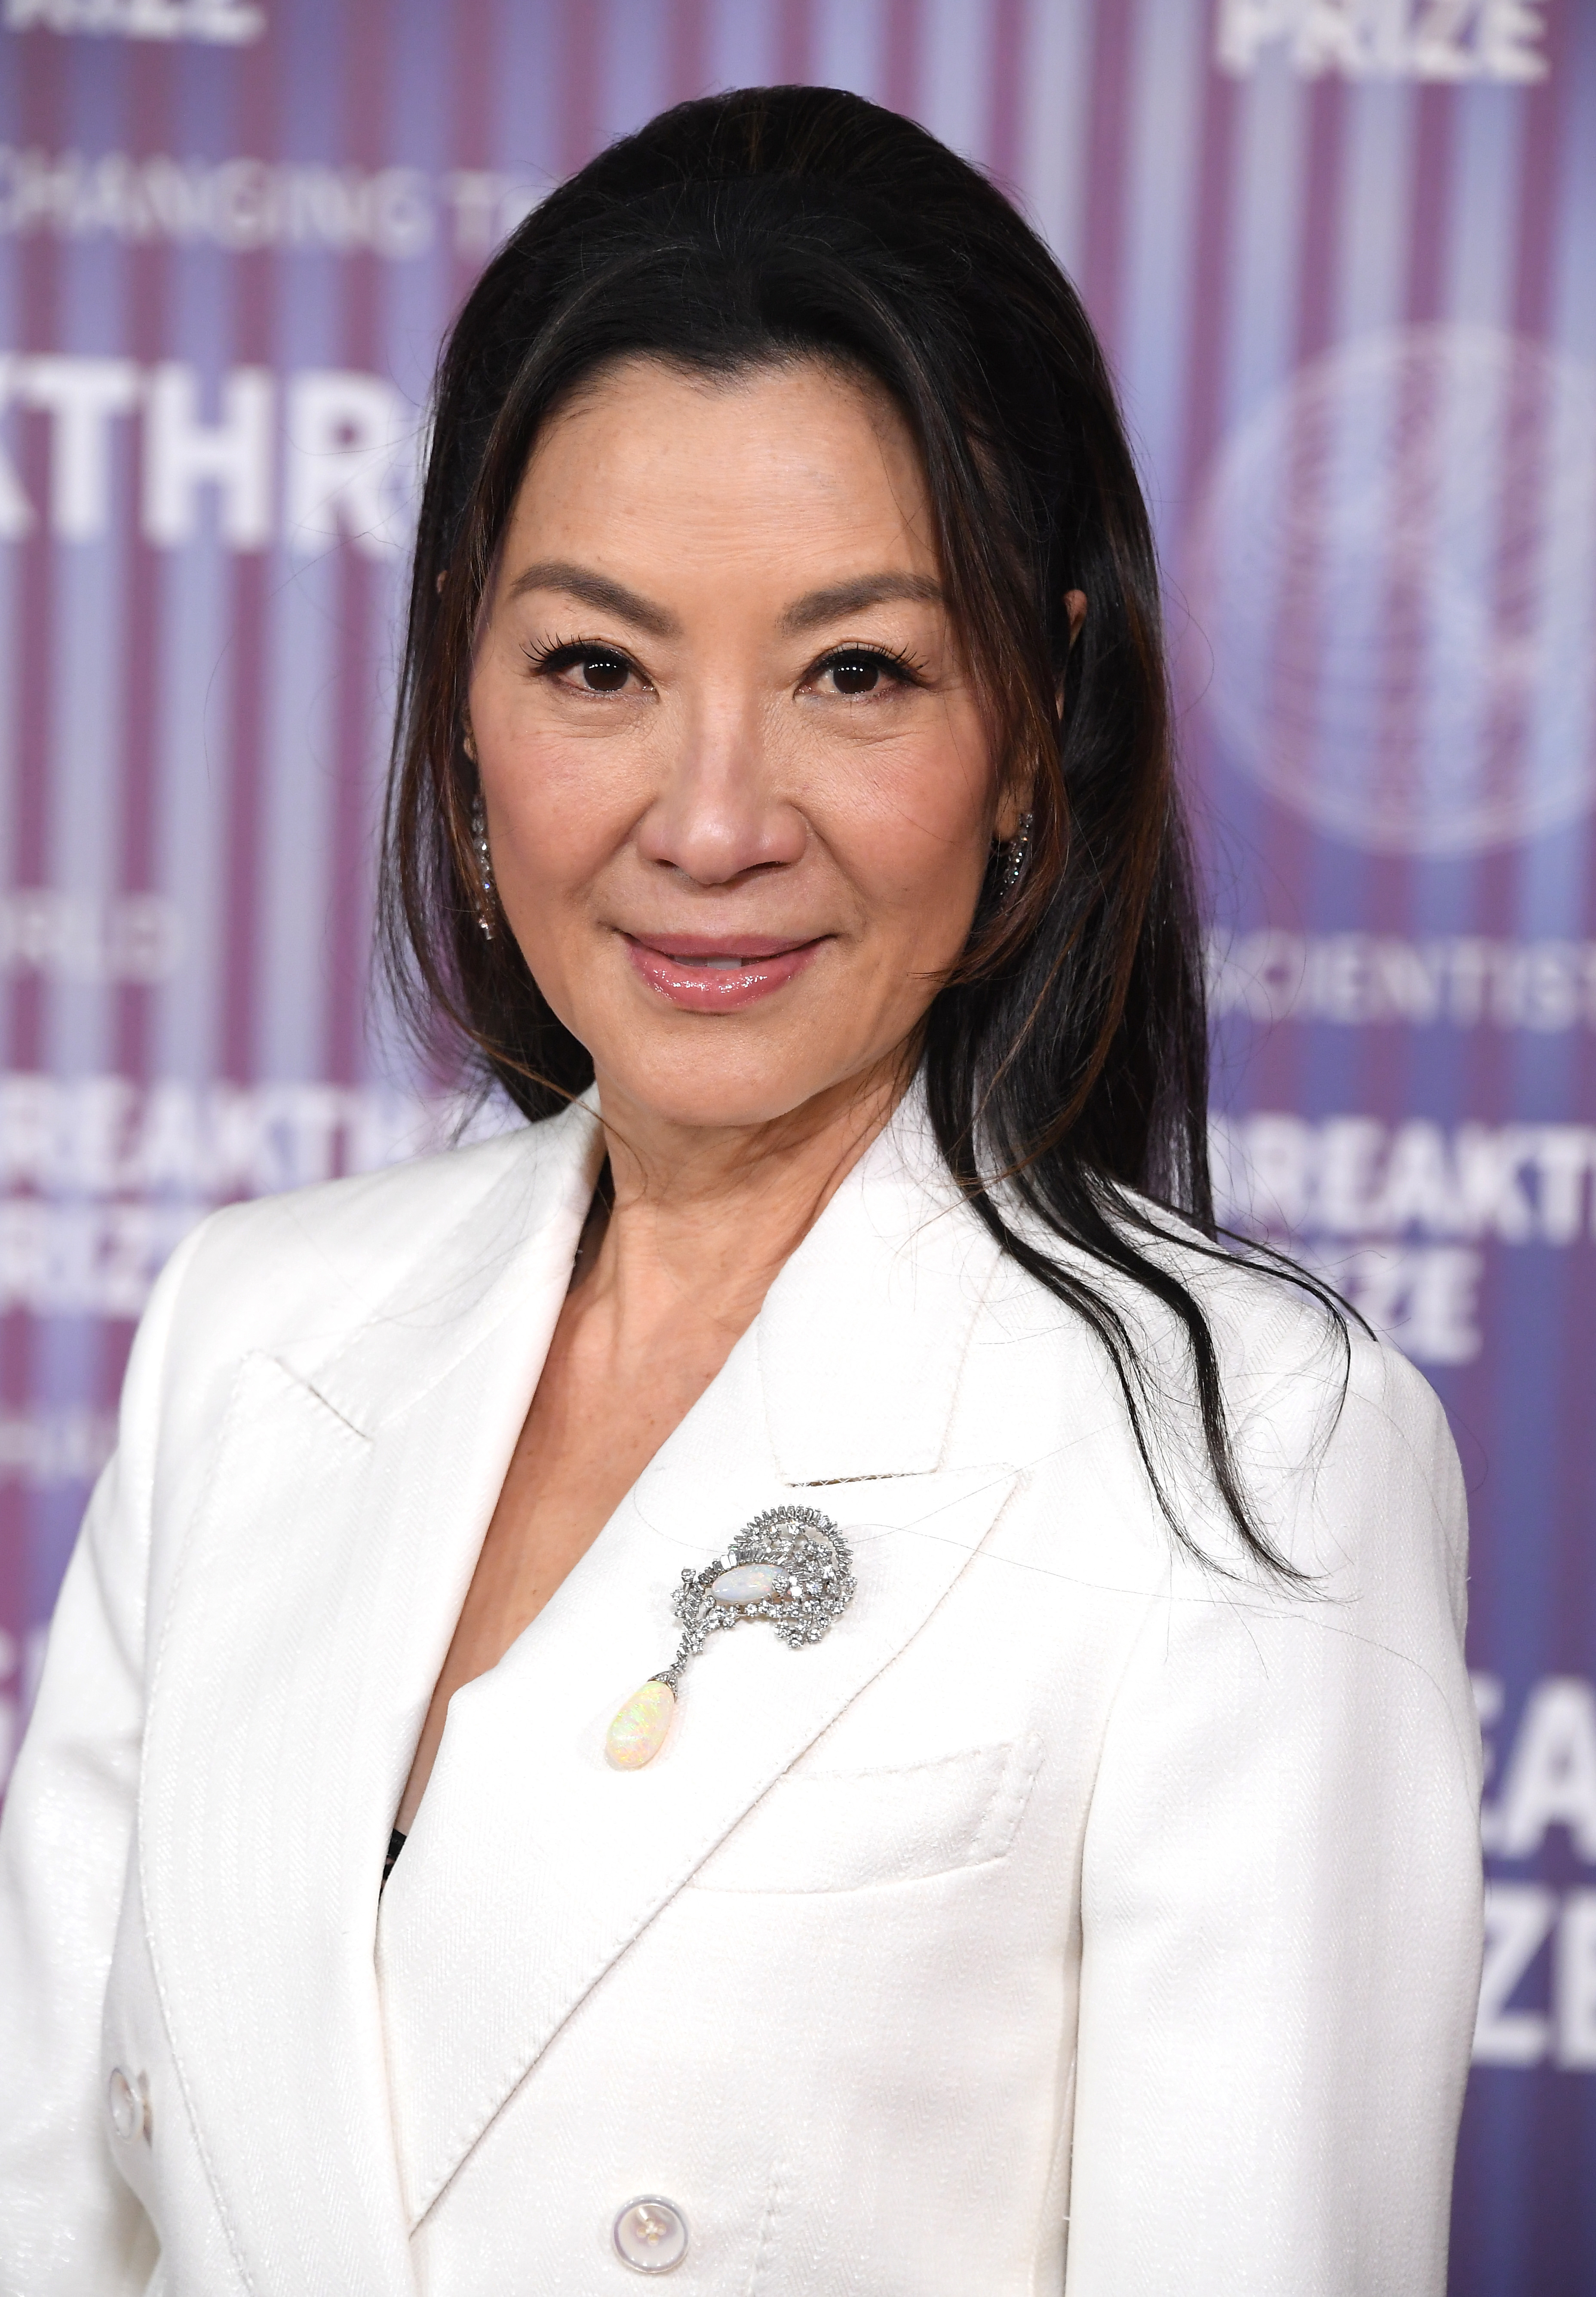 Michelle Yeoh in a white blazer with a brooch, posing at the Breakthrough Prize event